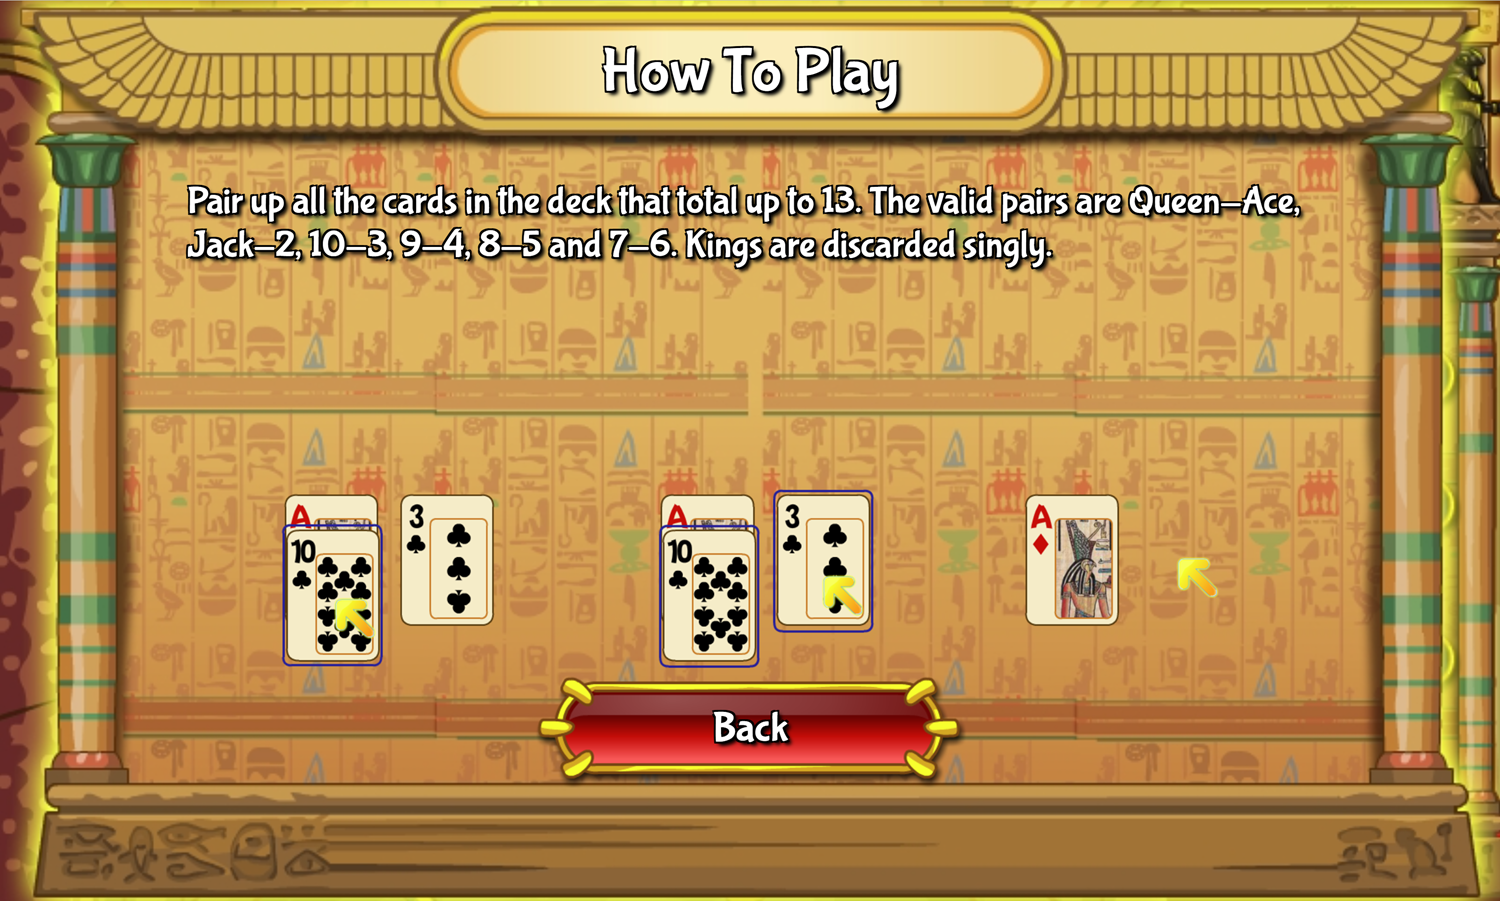 Egypt Pyramid Solitaire Game How to Play Screen Screenshot.